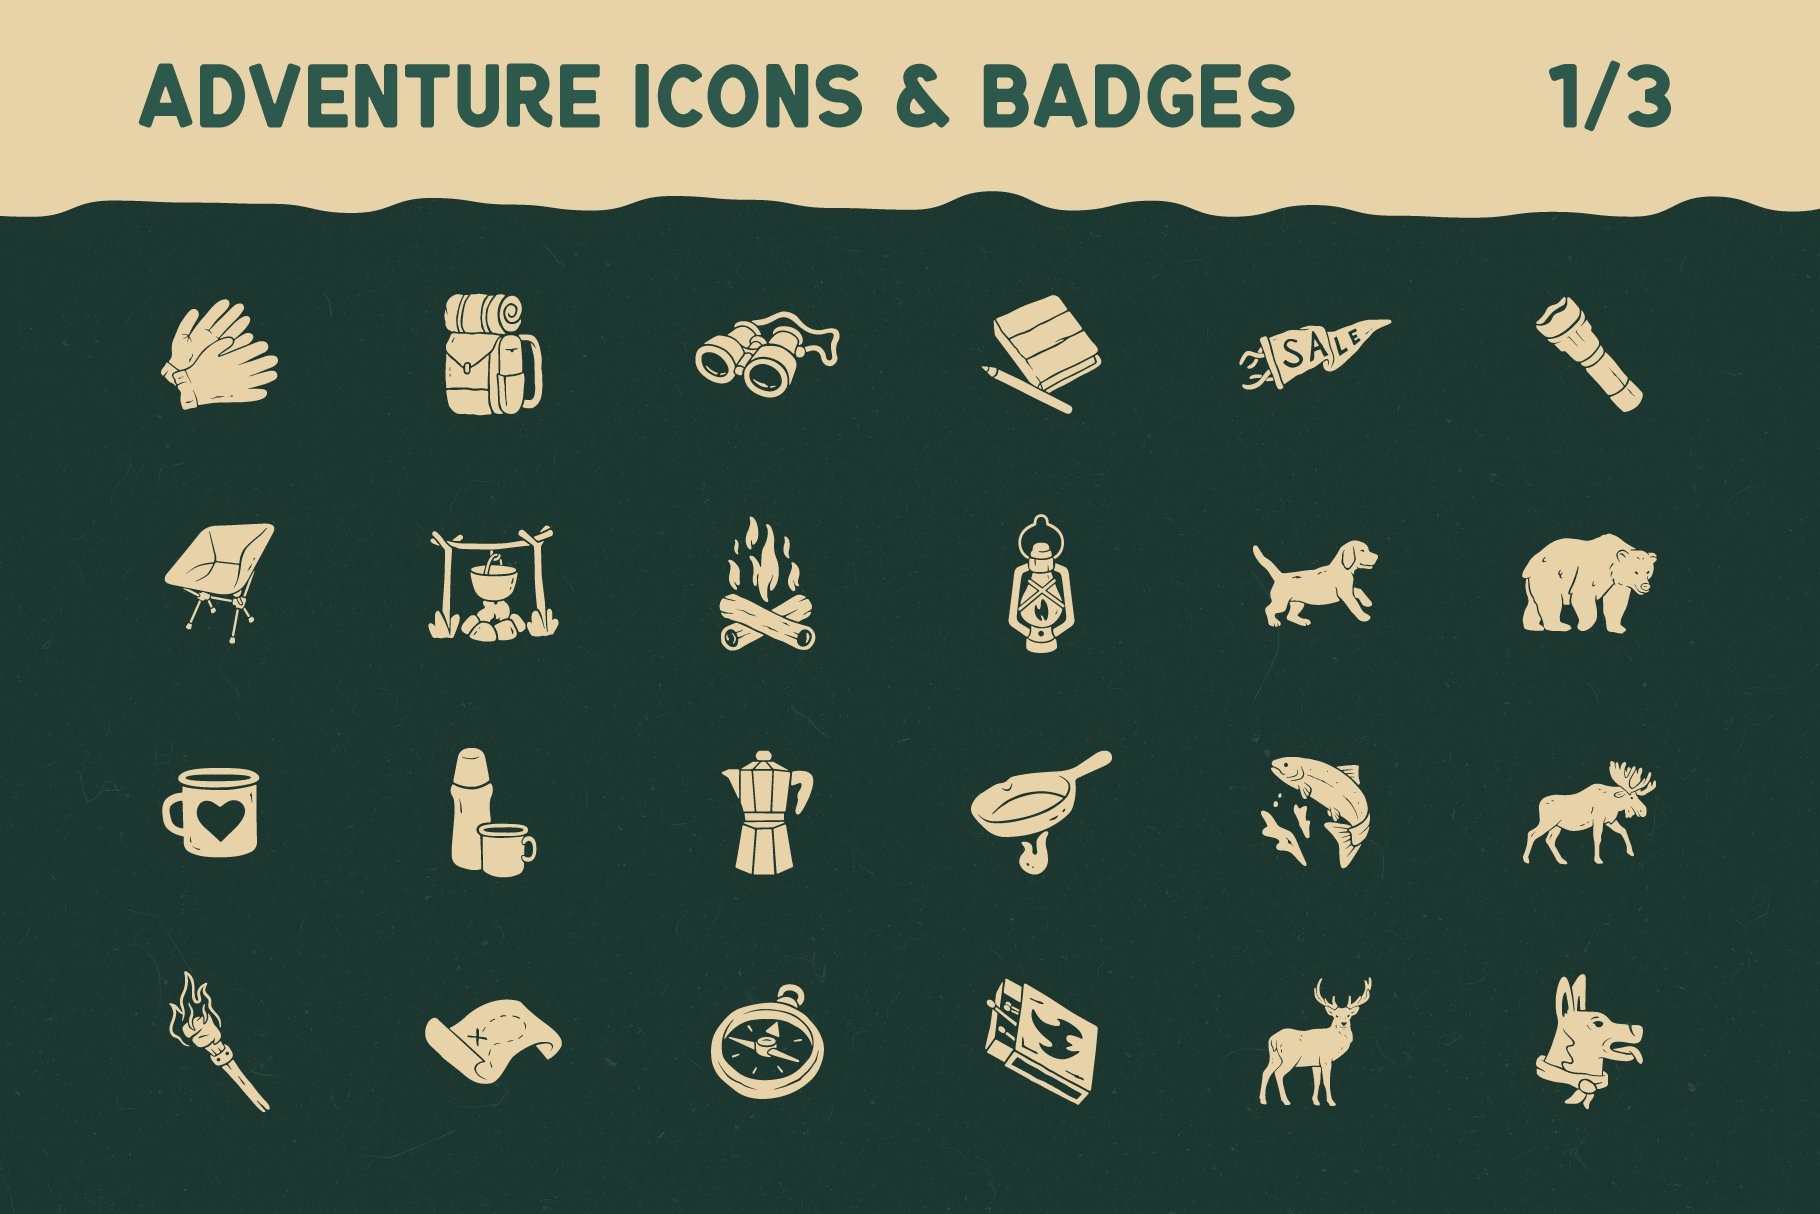 72 handmade adventure icons & badges preview image.